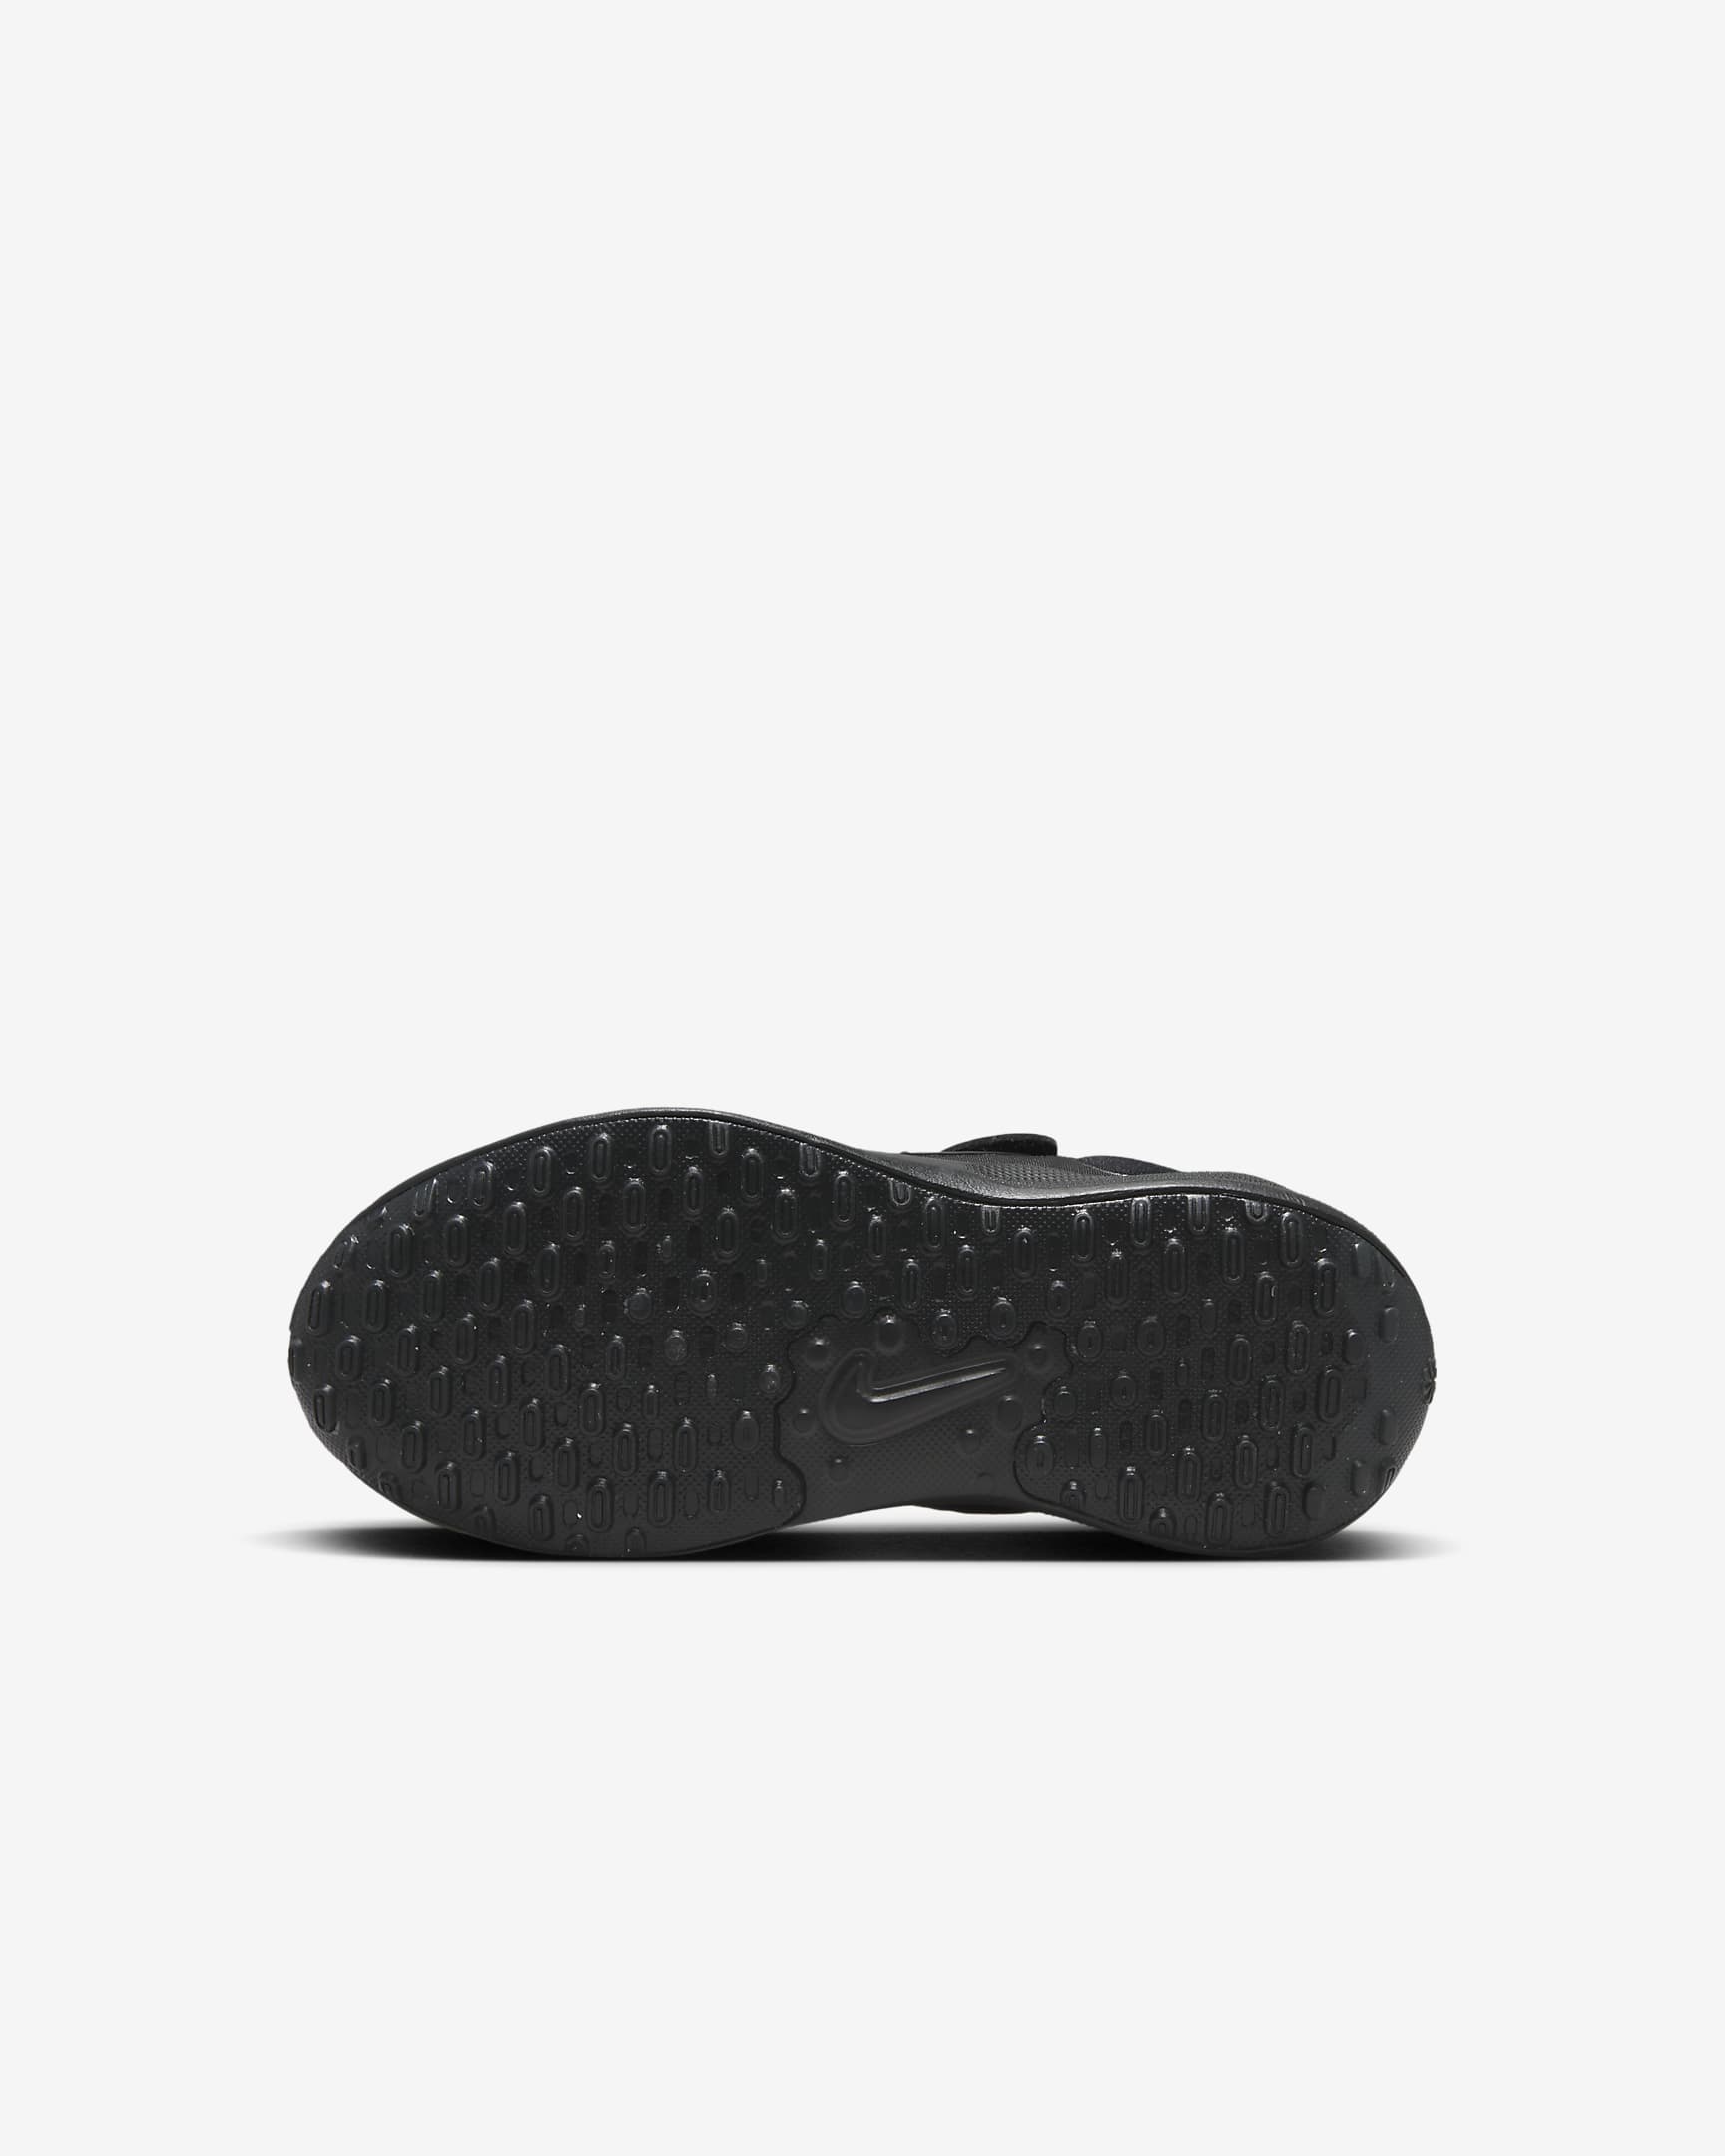 Nike Revolution 7 Younger Kids' Shoes - Black/Anthracite